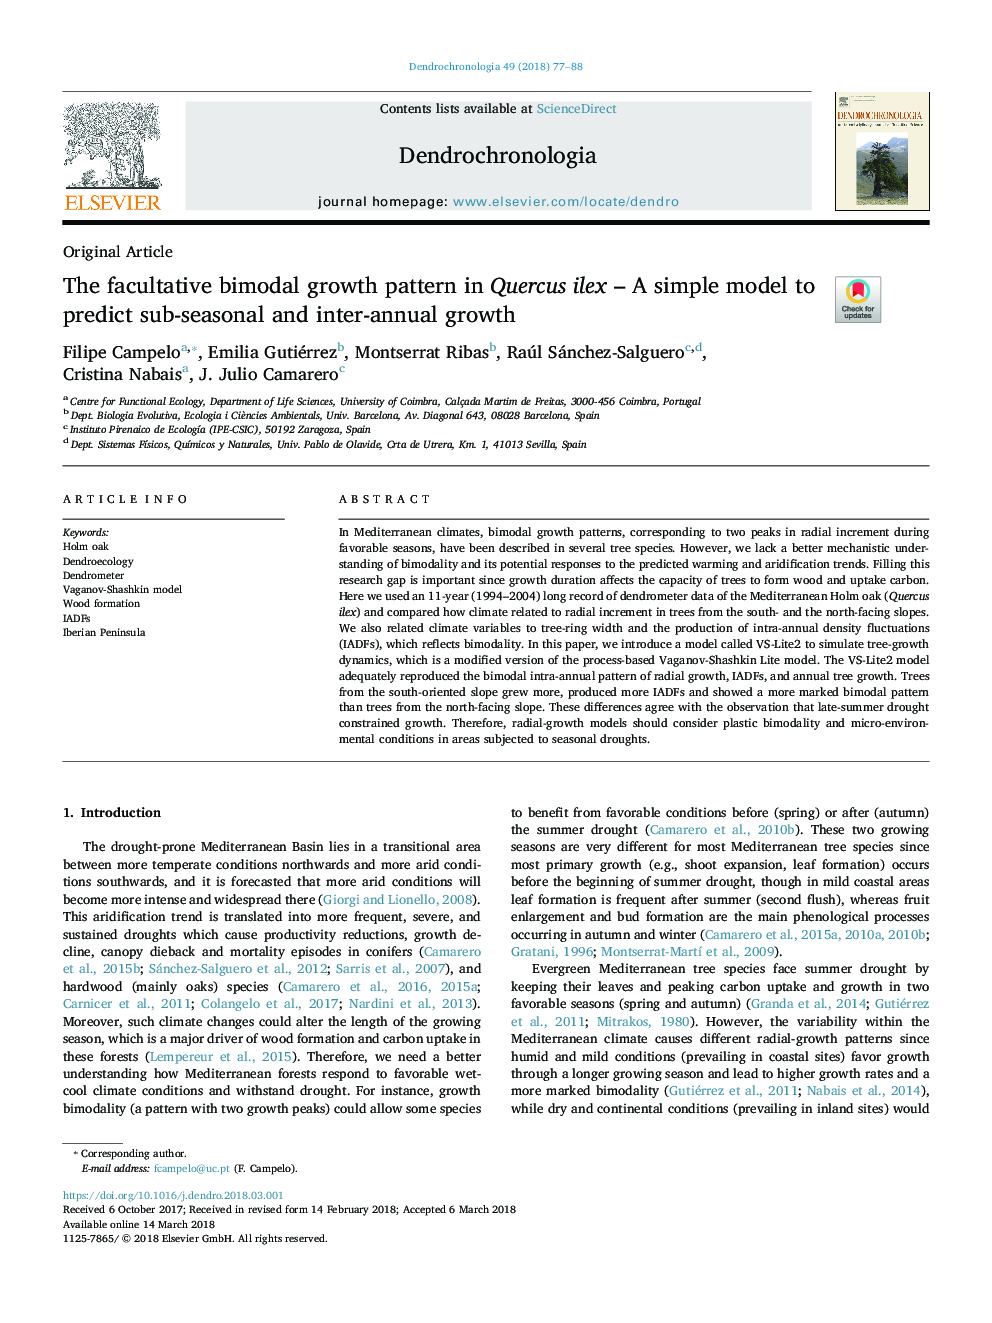 The facultative bimodal growth pattern in Quercus ilex - A simple model to predict sub-seasonal and inter-annual growth